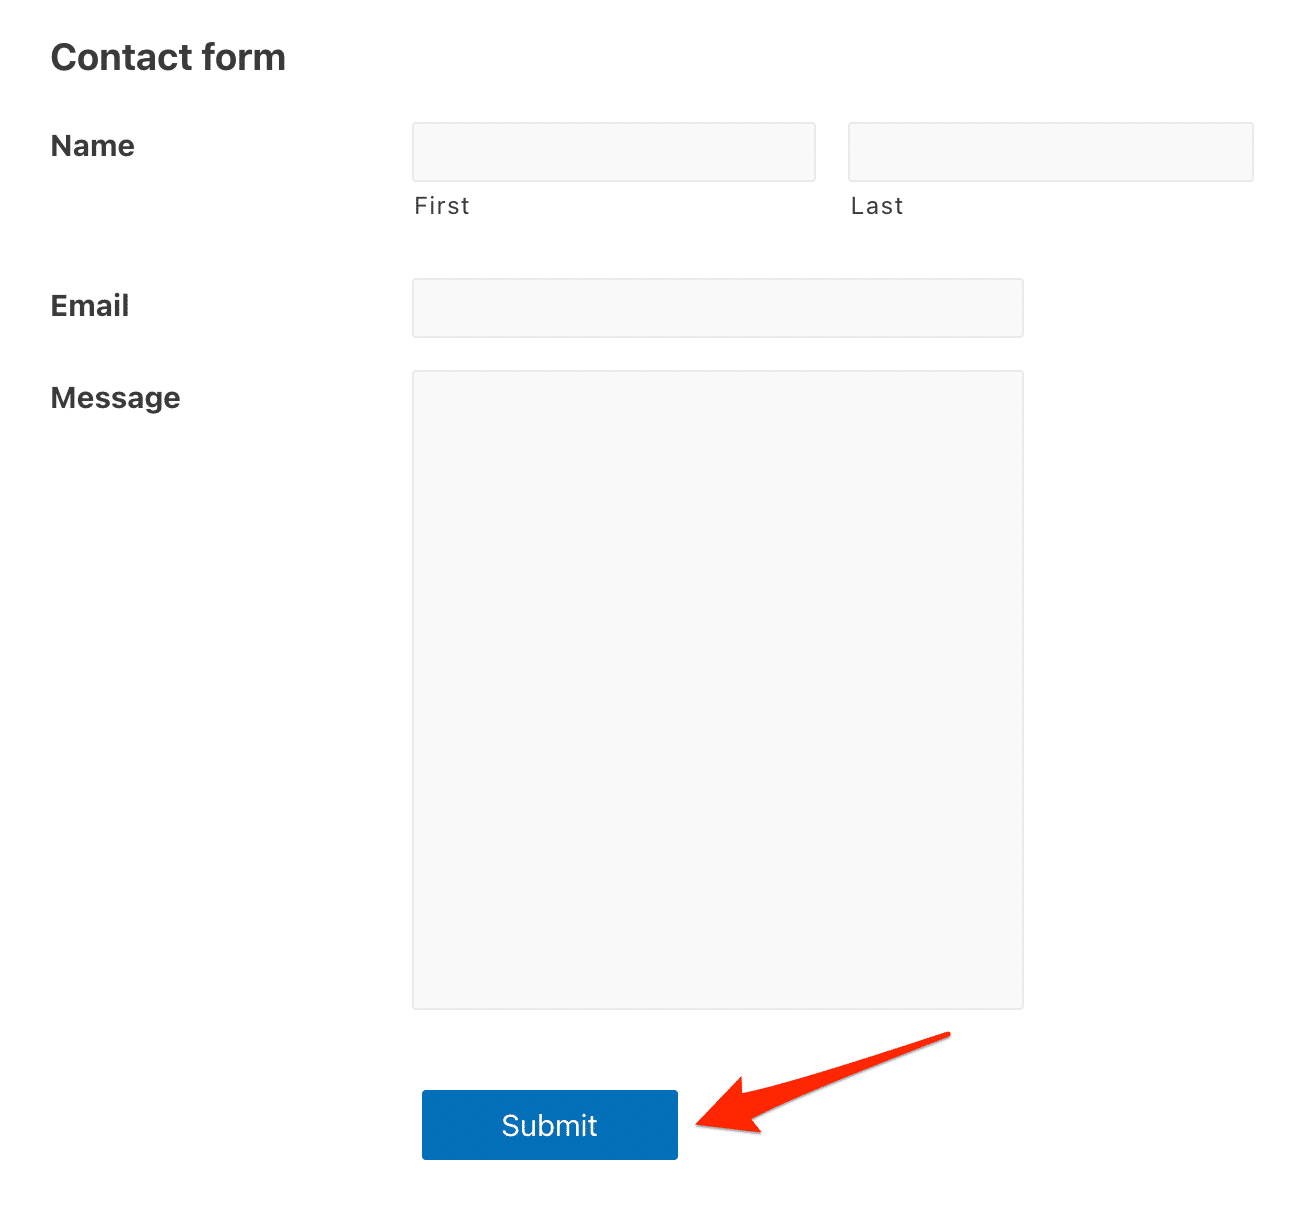 Contact form "Submit" button in blue.